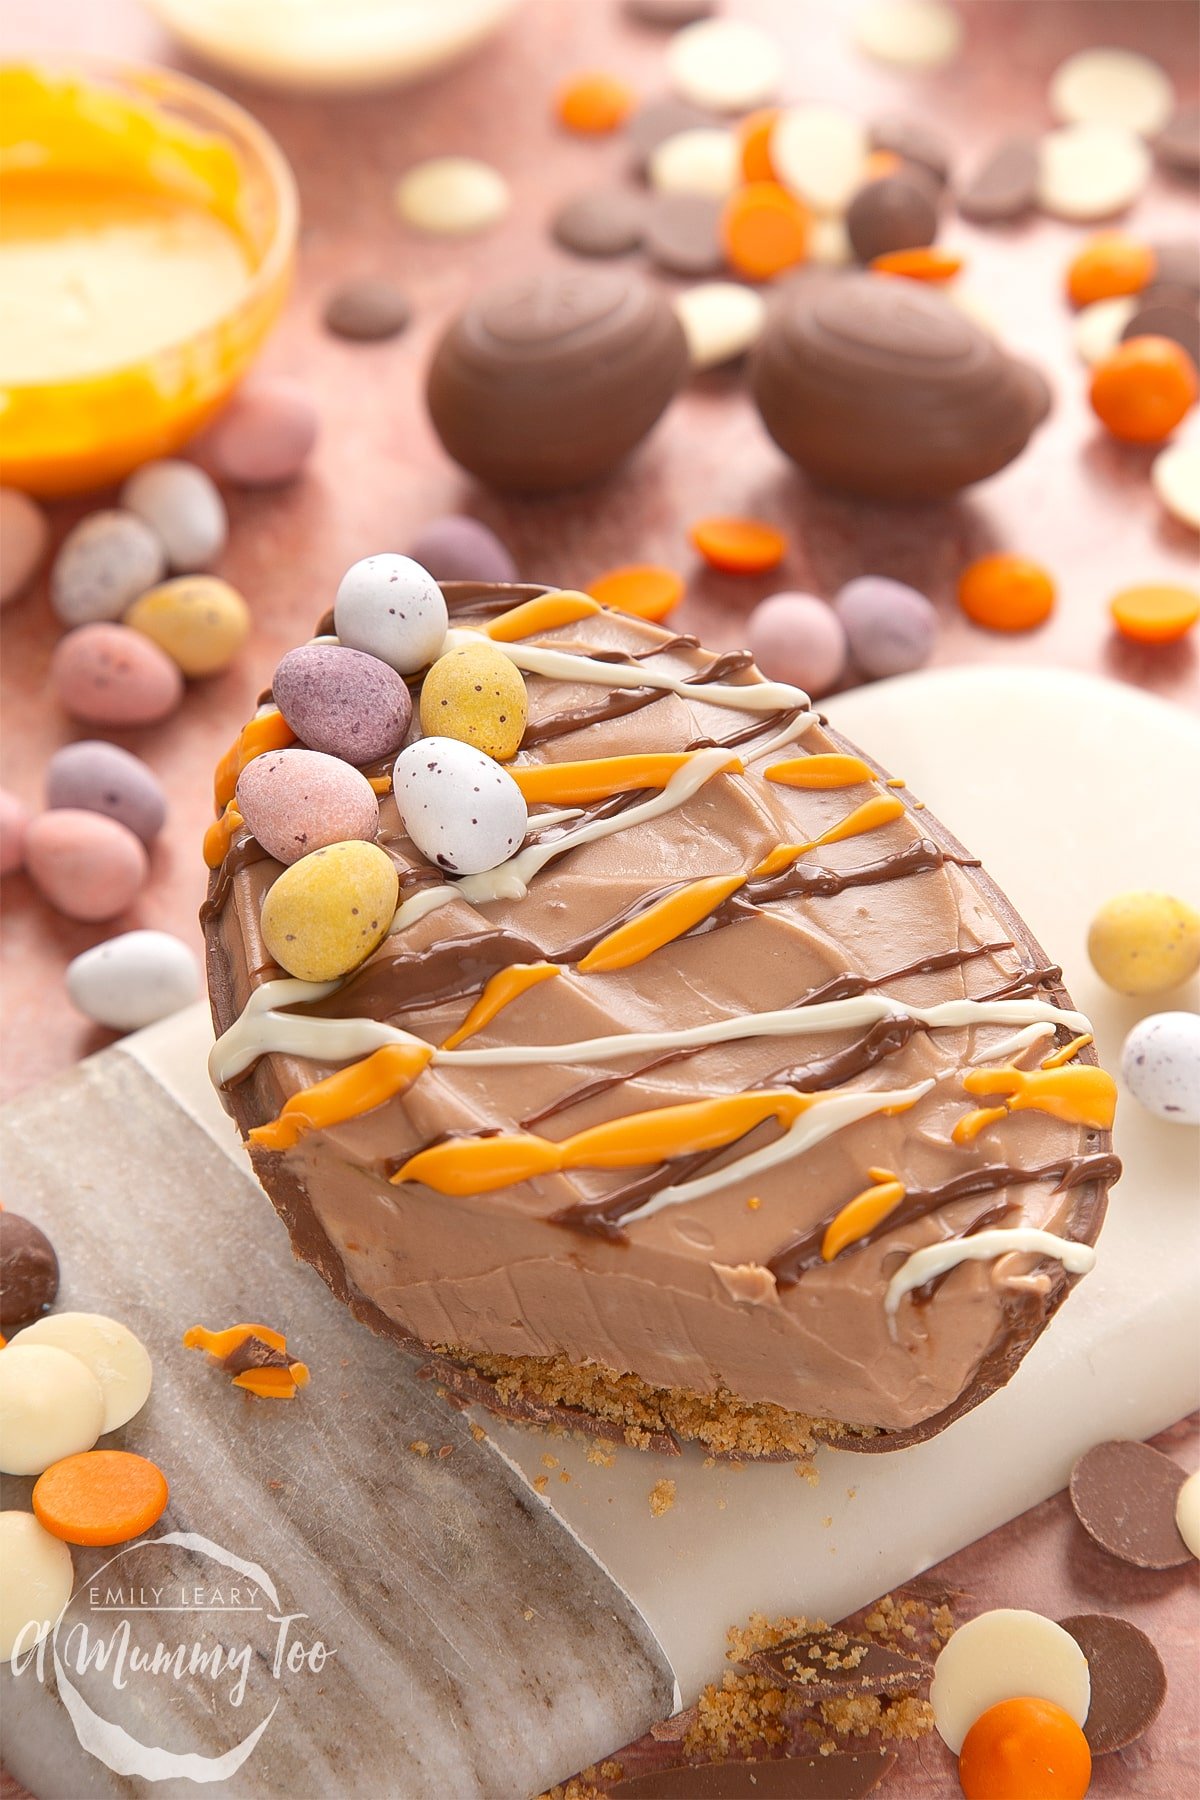 An Easter egg cheesecake on a small marble board. The chocolate cheesecake filling sits in a chocolate Easter egg shell, drizzled with white, milk and orange chocolate. The egg has been cut to show the hidden biscuit base.